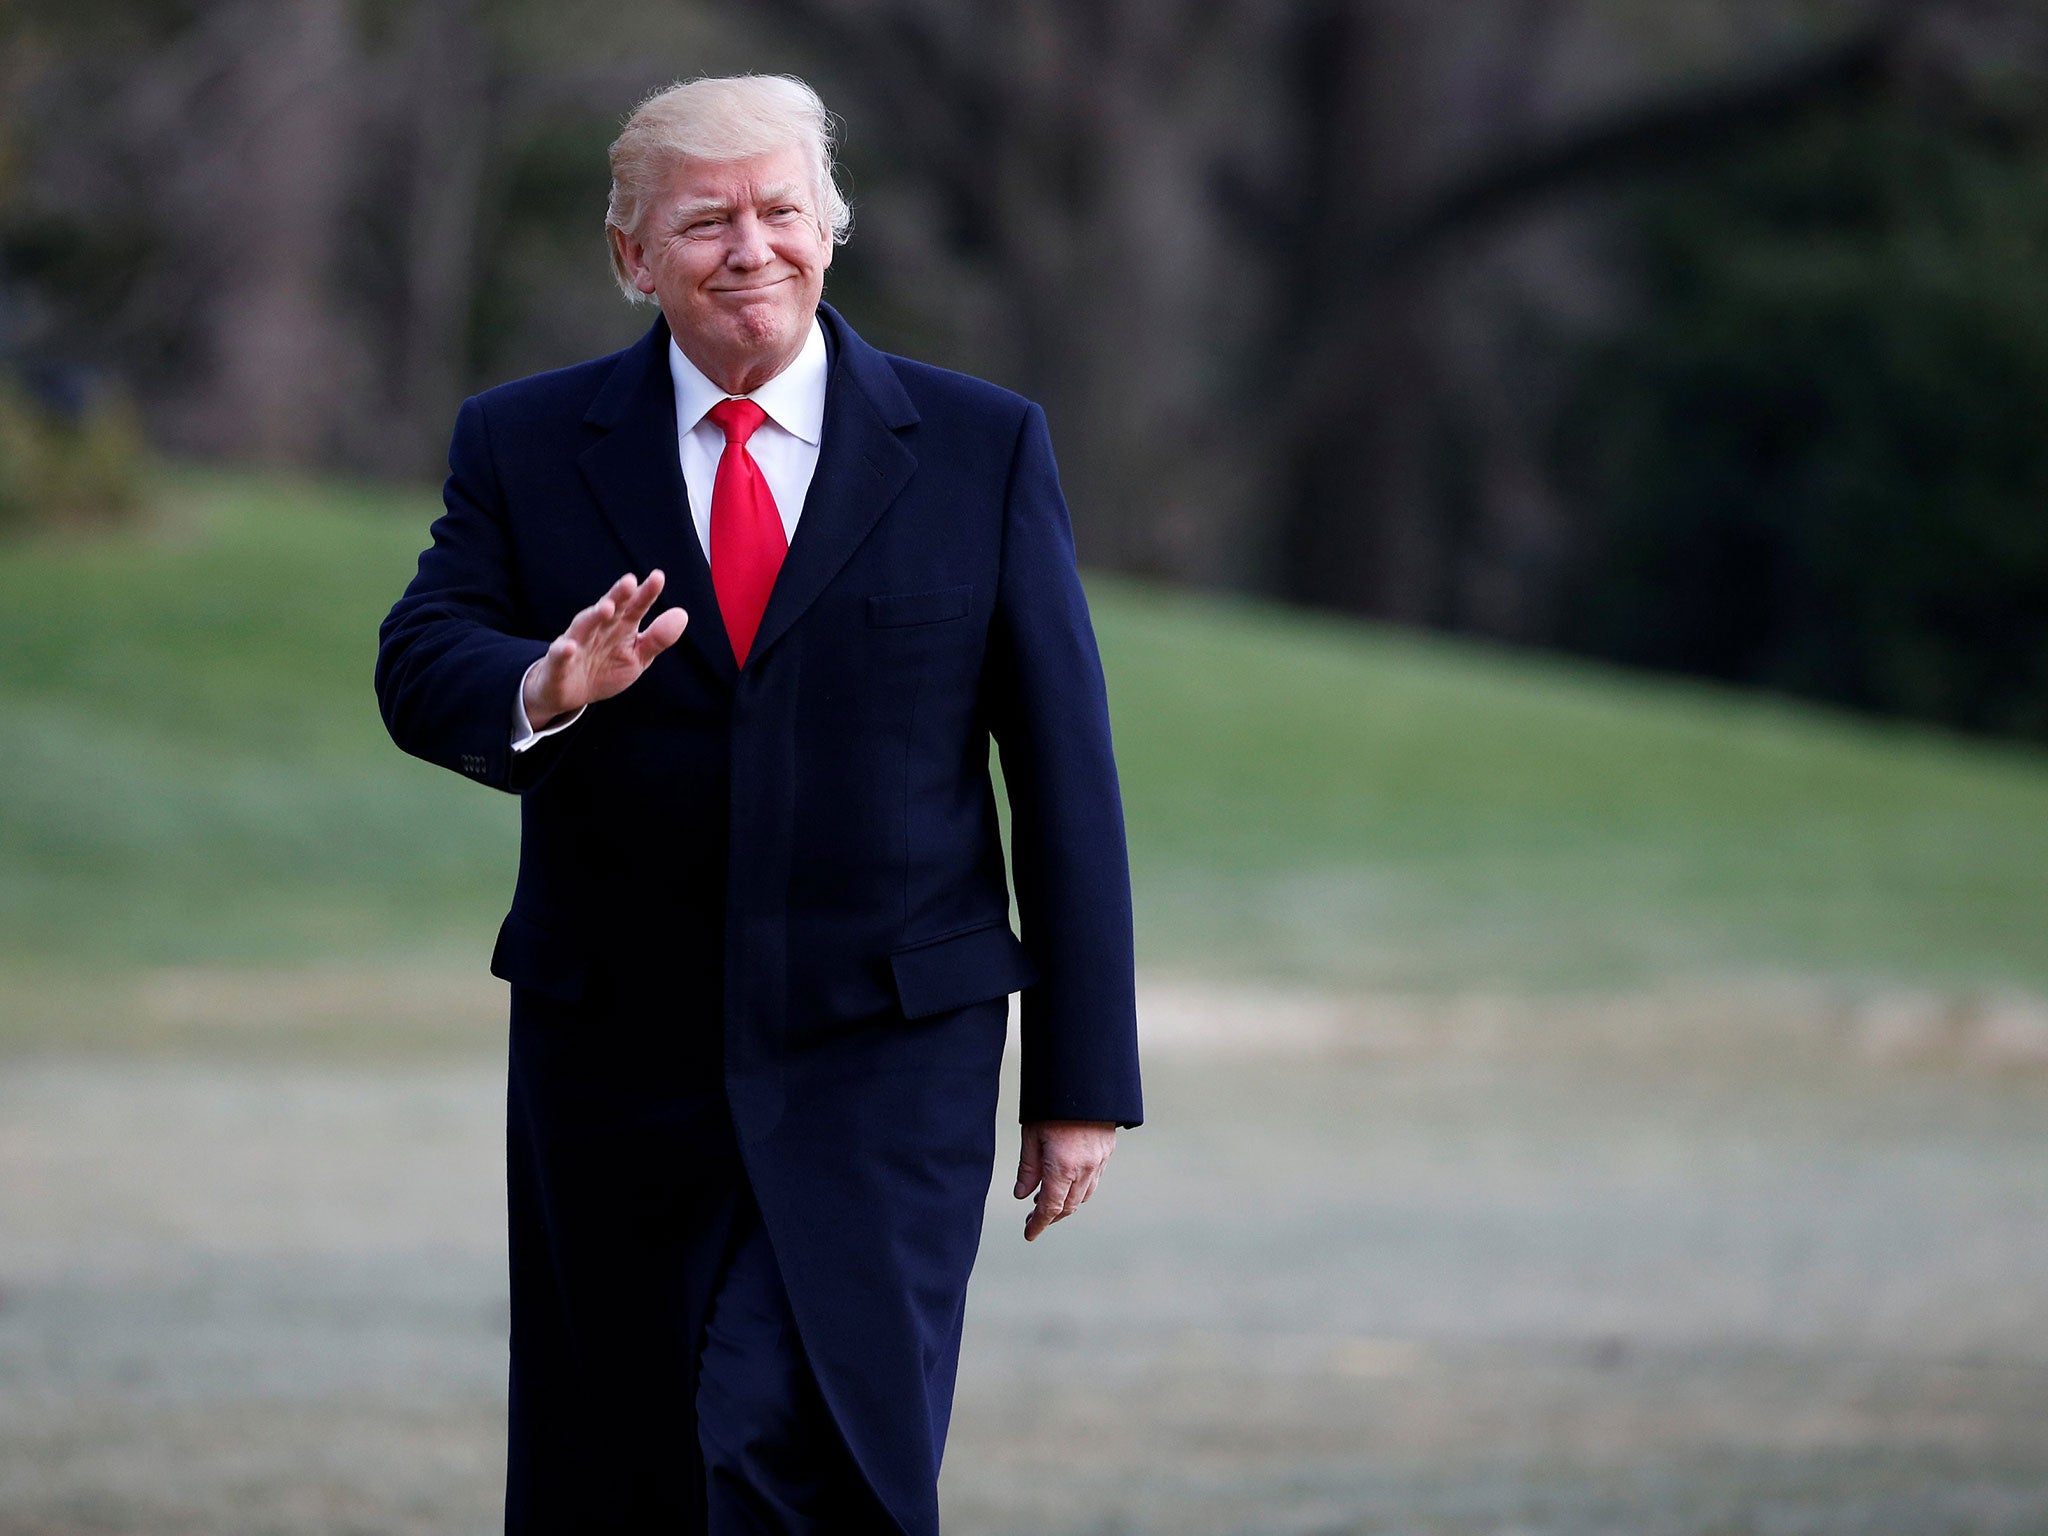 Donald Trump waves as he walks from Marine One upon his return to the White House in Washington, 19 March, 2017